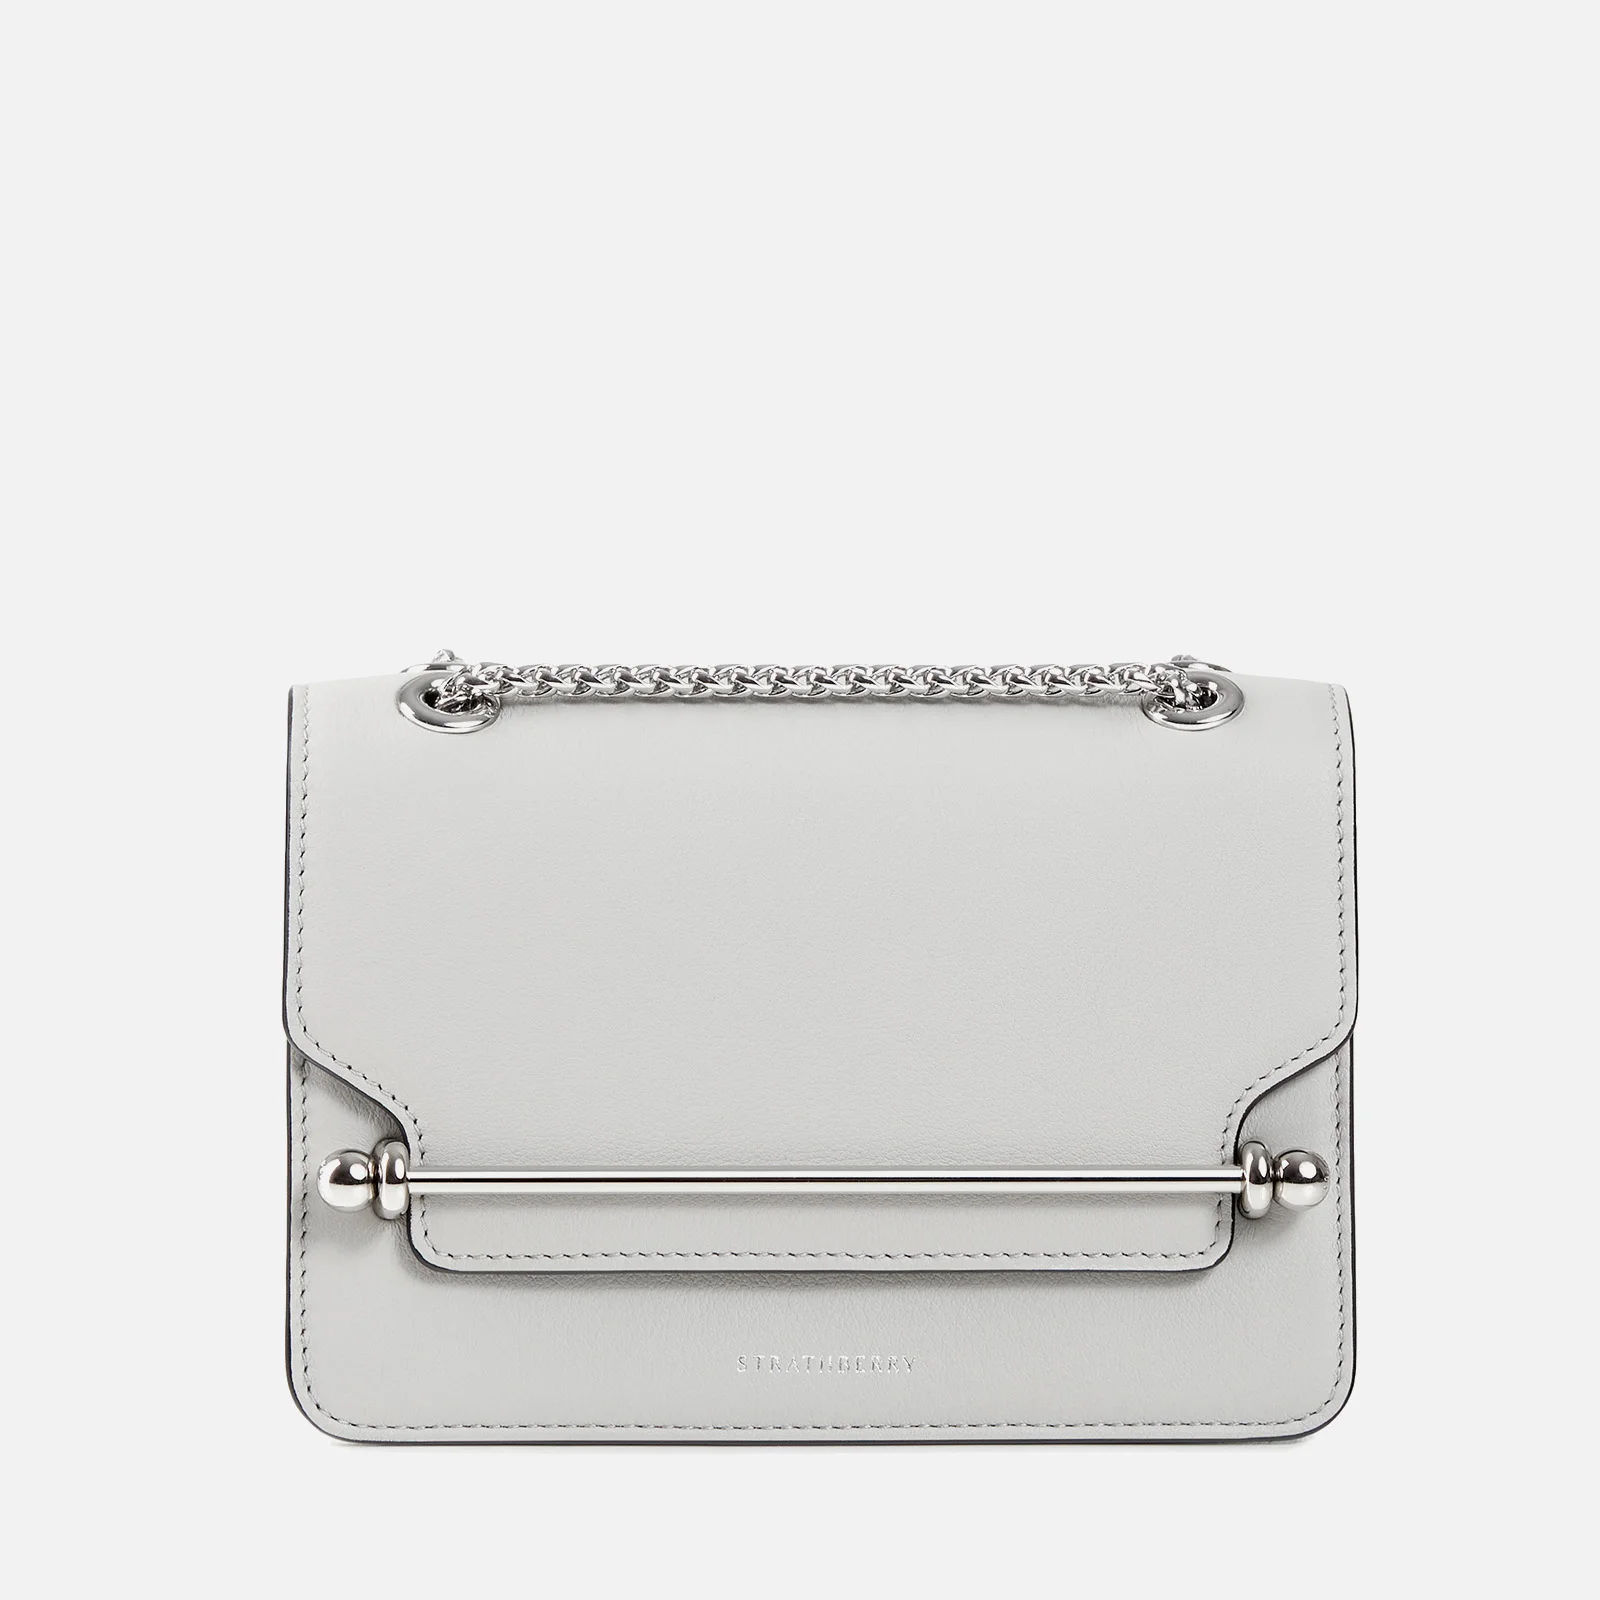 Strathberry Women's East/West Mini Bag - Pearl Grey Image 1